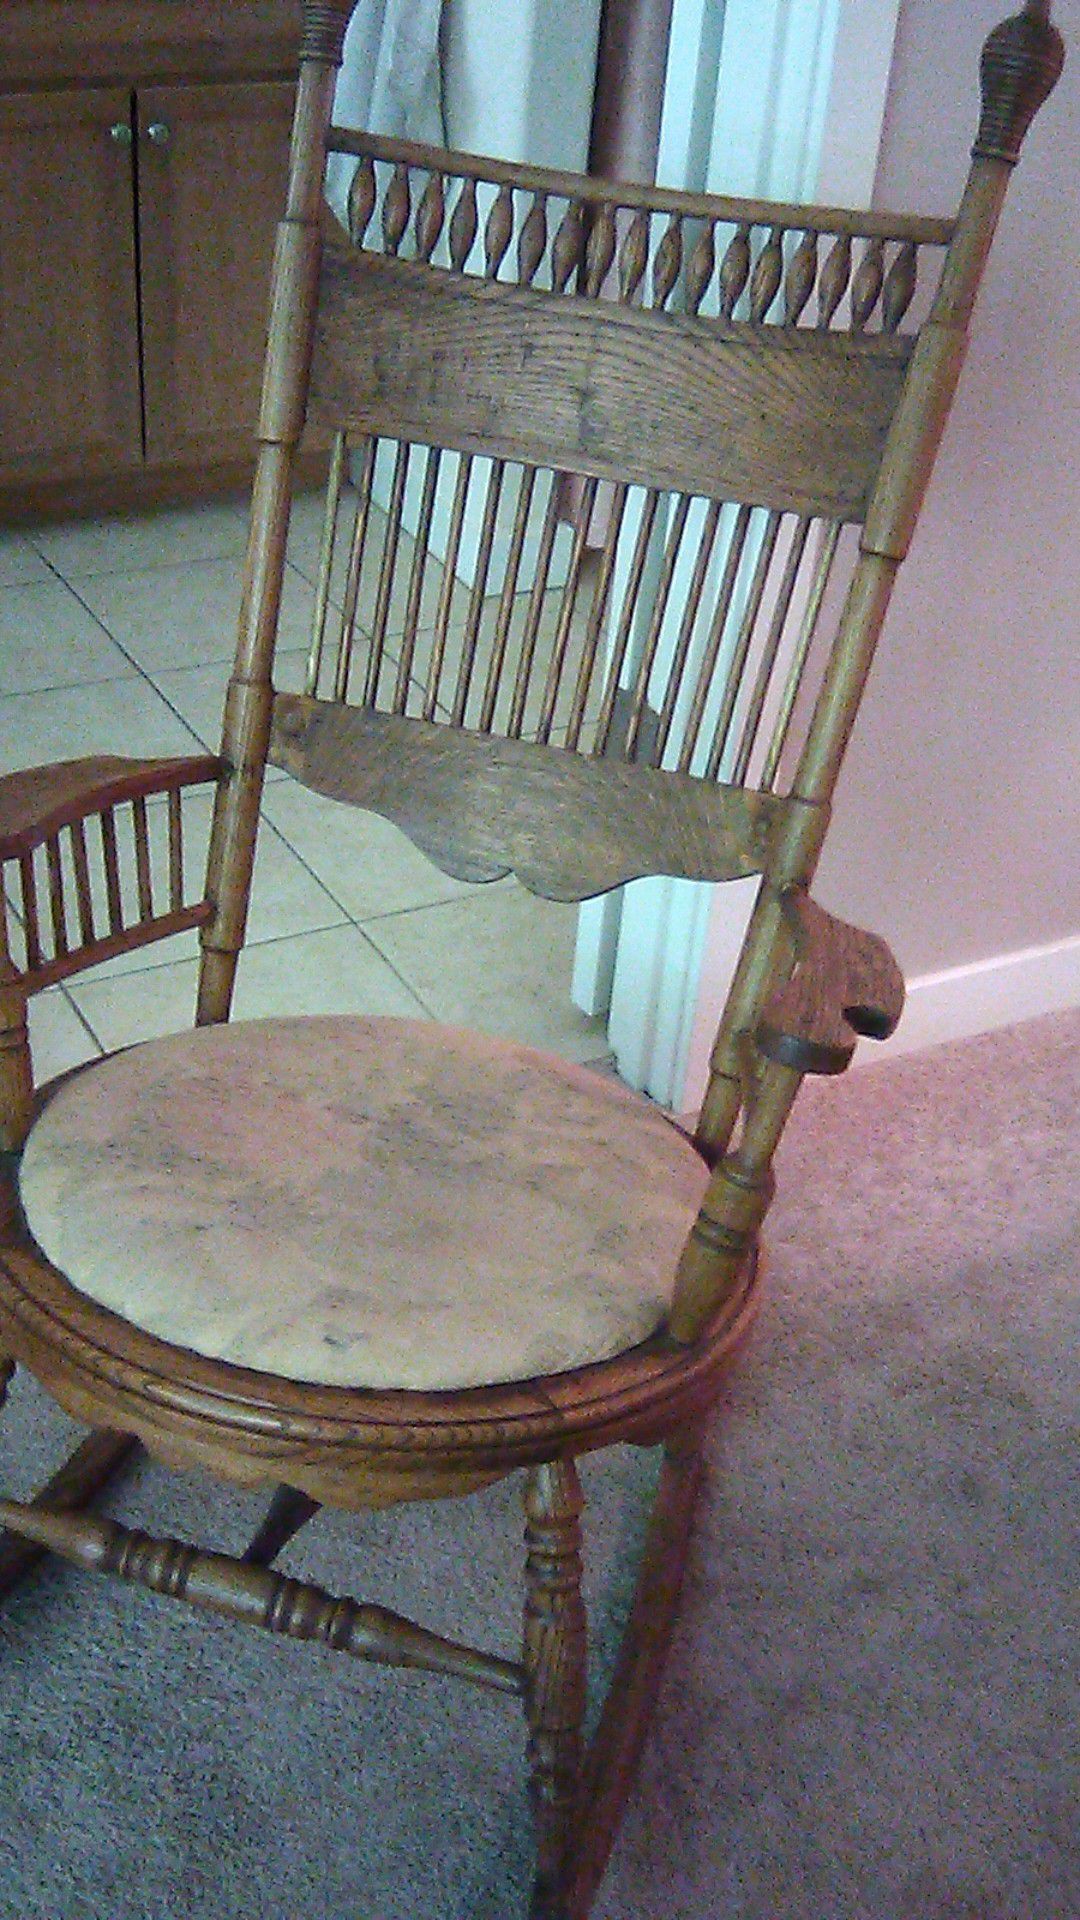 This is antique replica rocking chair